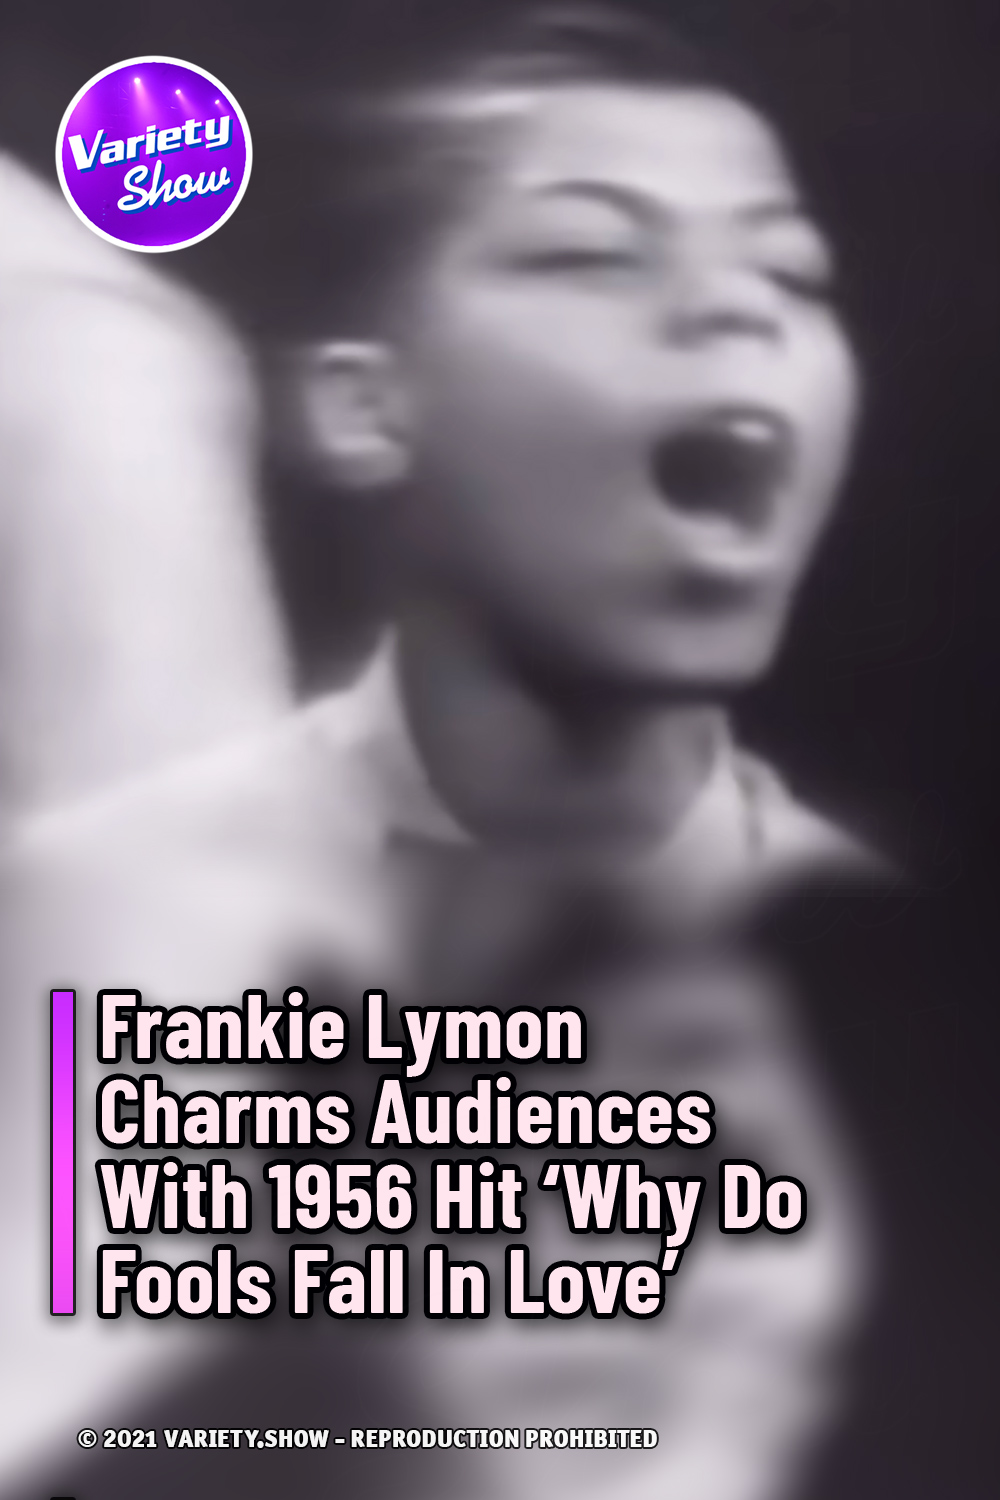 Frankie Lymon Charms Audiences With 1956 Hit ‘Why Do Fools Fall In Love’